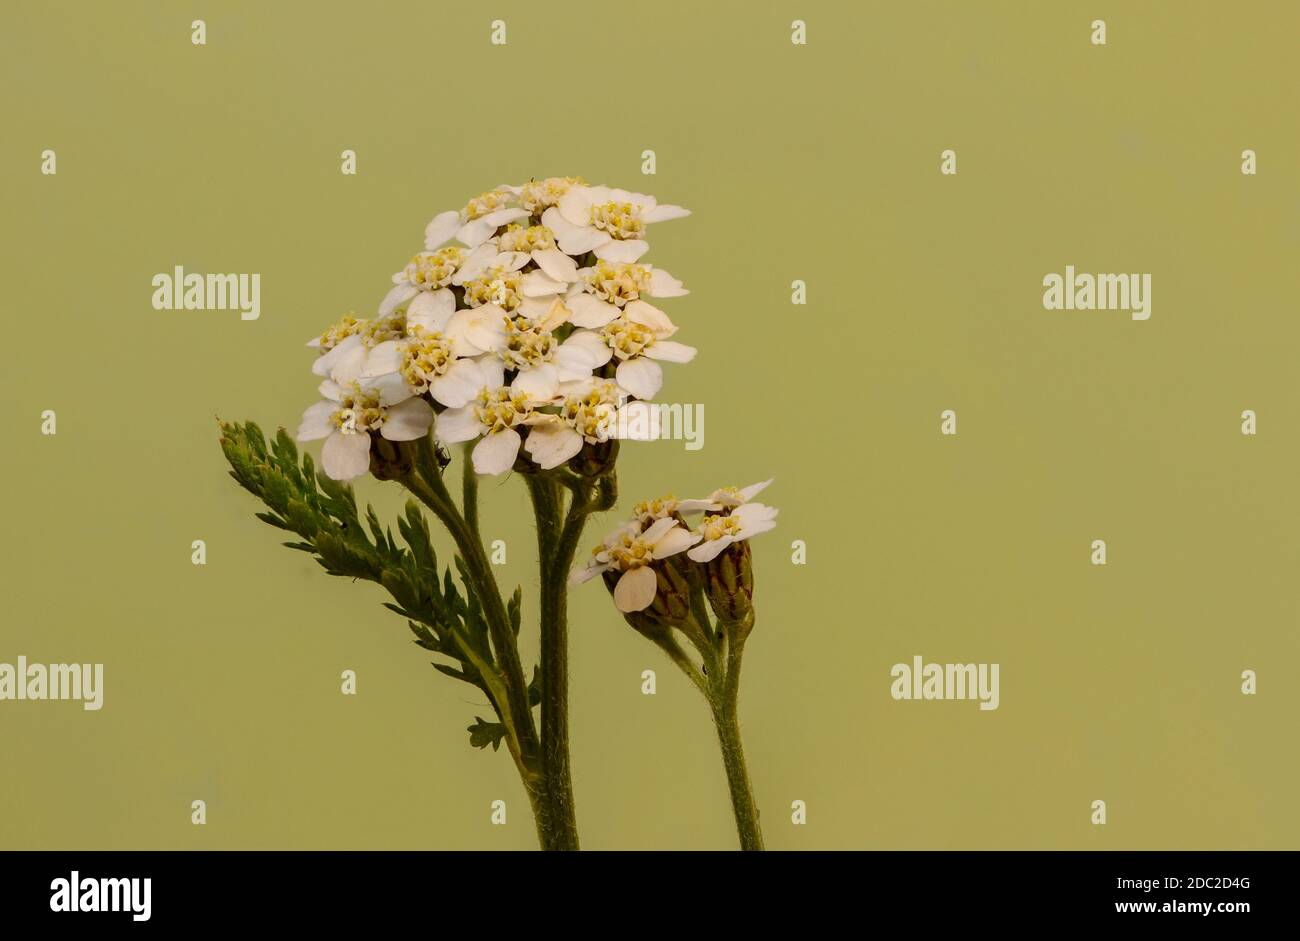 Close-up of white yarrow blossom against light green background Stock Photo